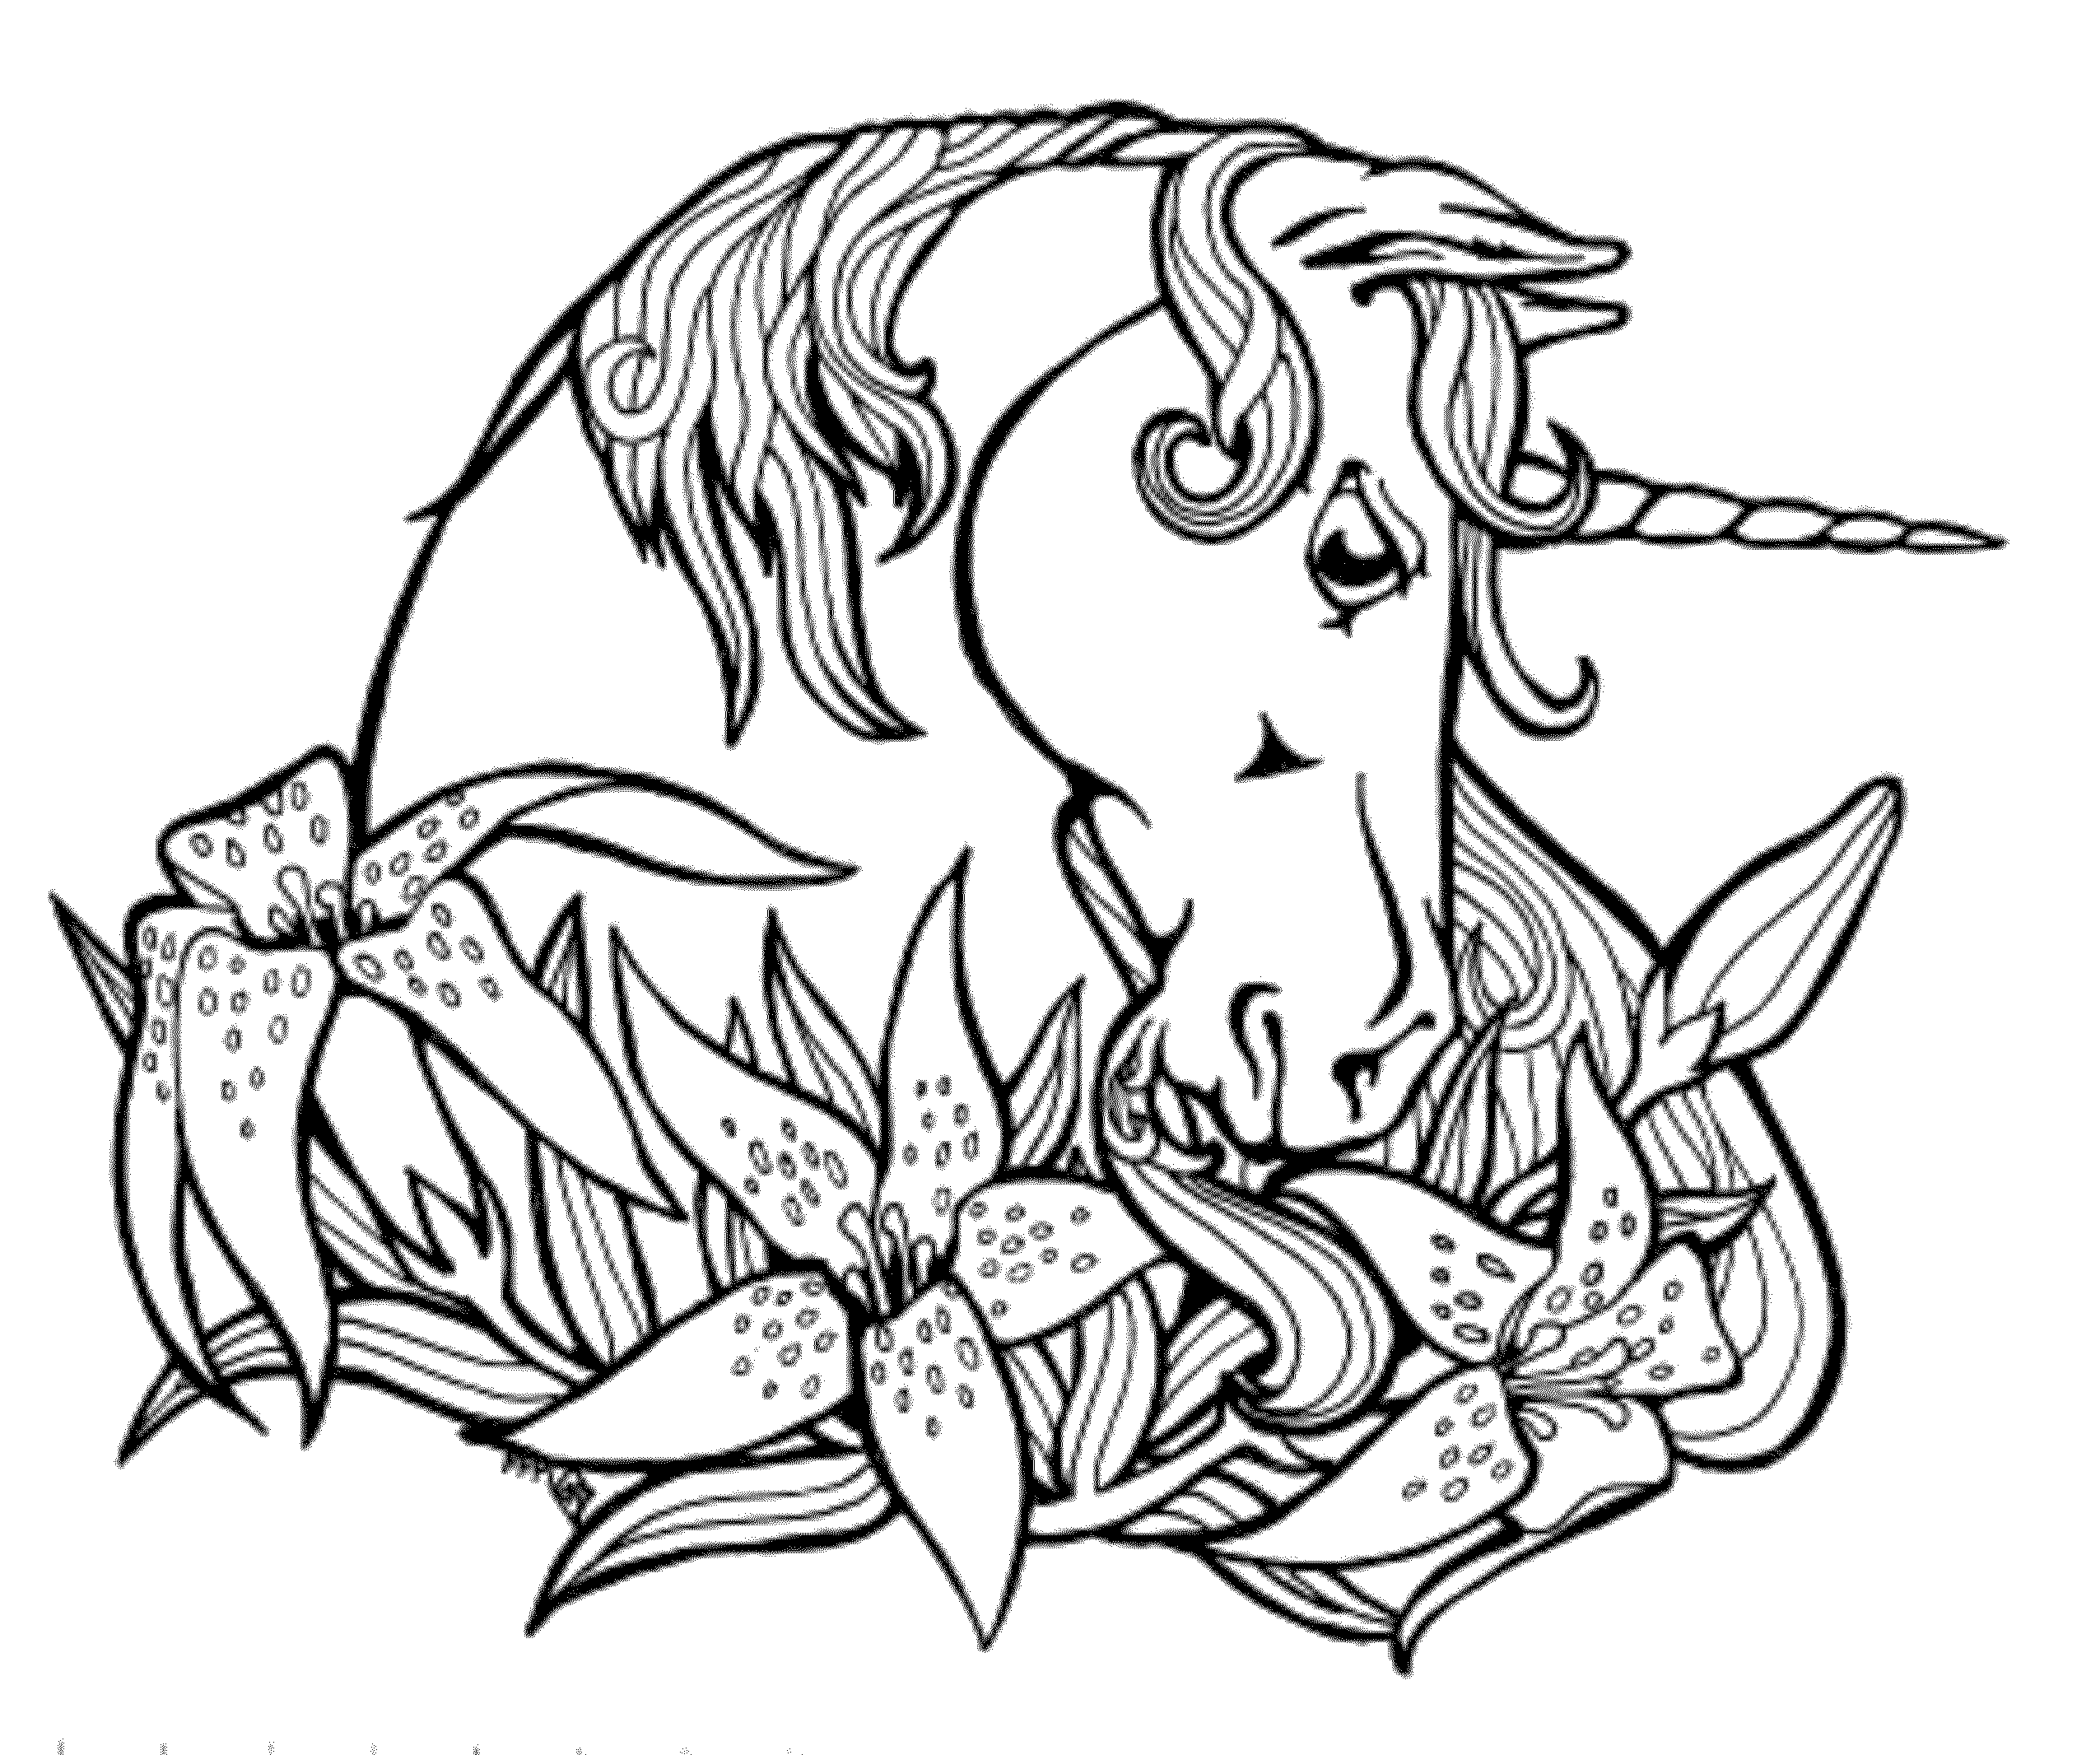 Unicorns - Free Colouring Pages